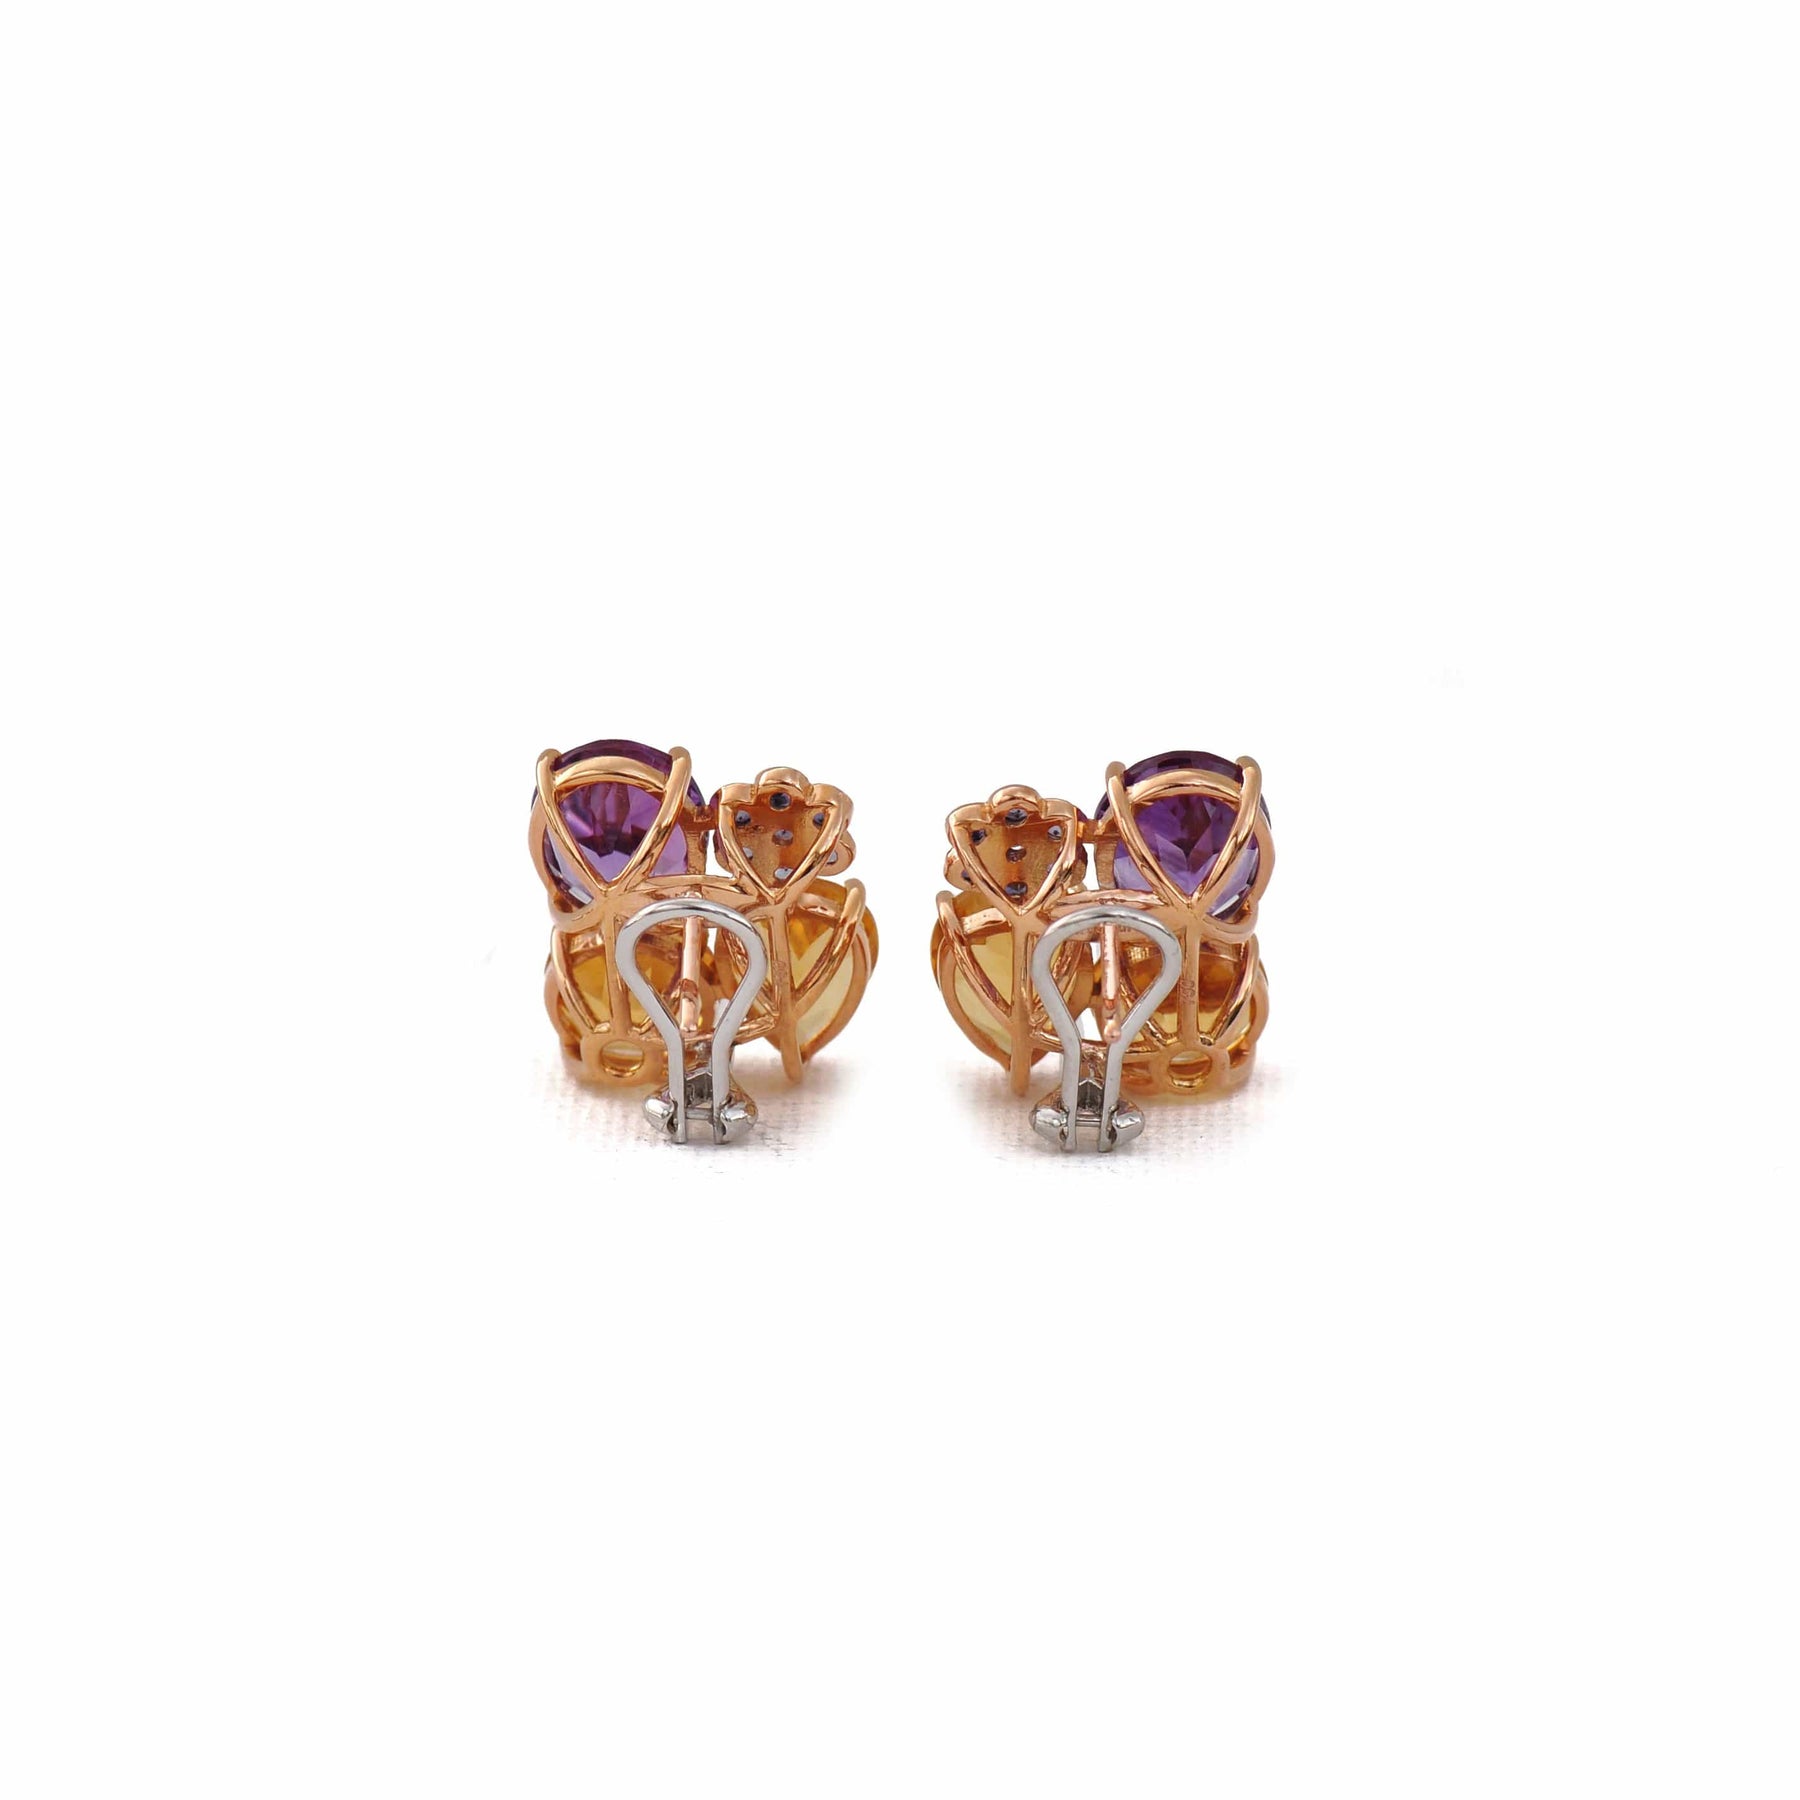 18 Karat Amber Hue Gold Gemstones Earrings – Hollywood Royalty Earrings - Chris Aire Fine Jewelry & Timepieces